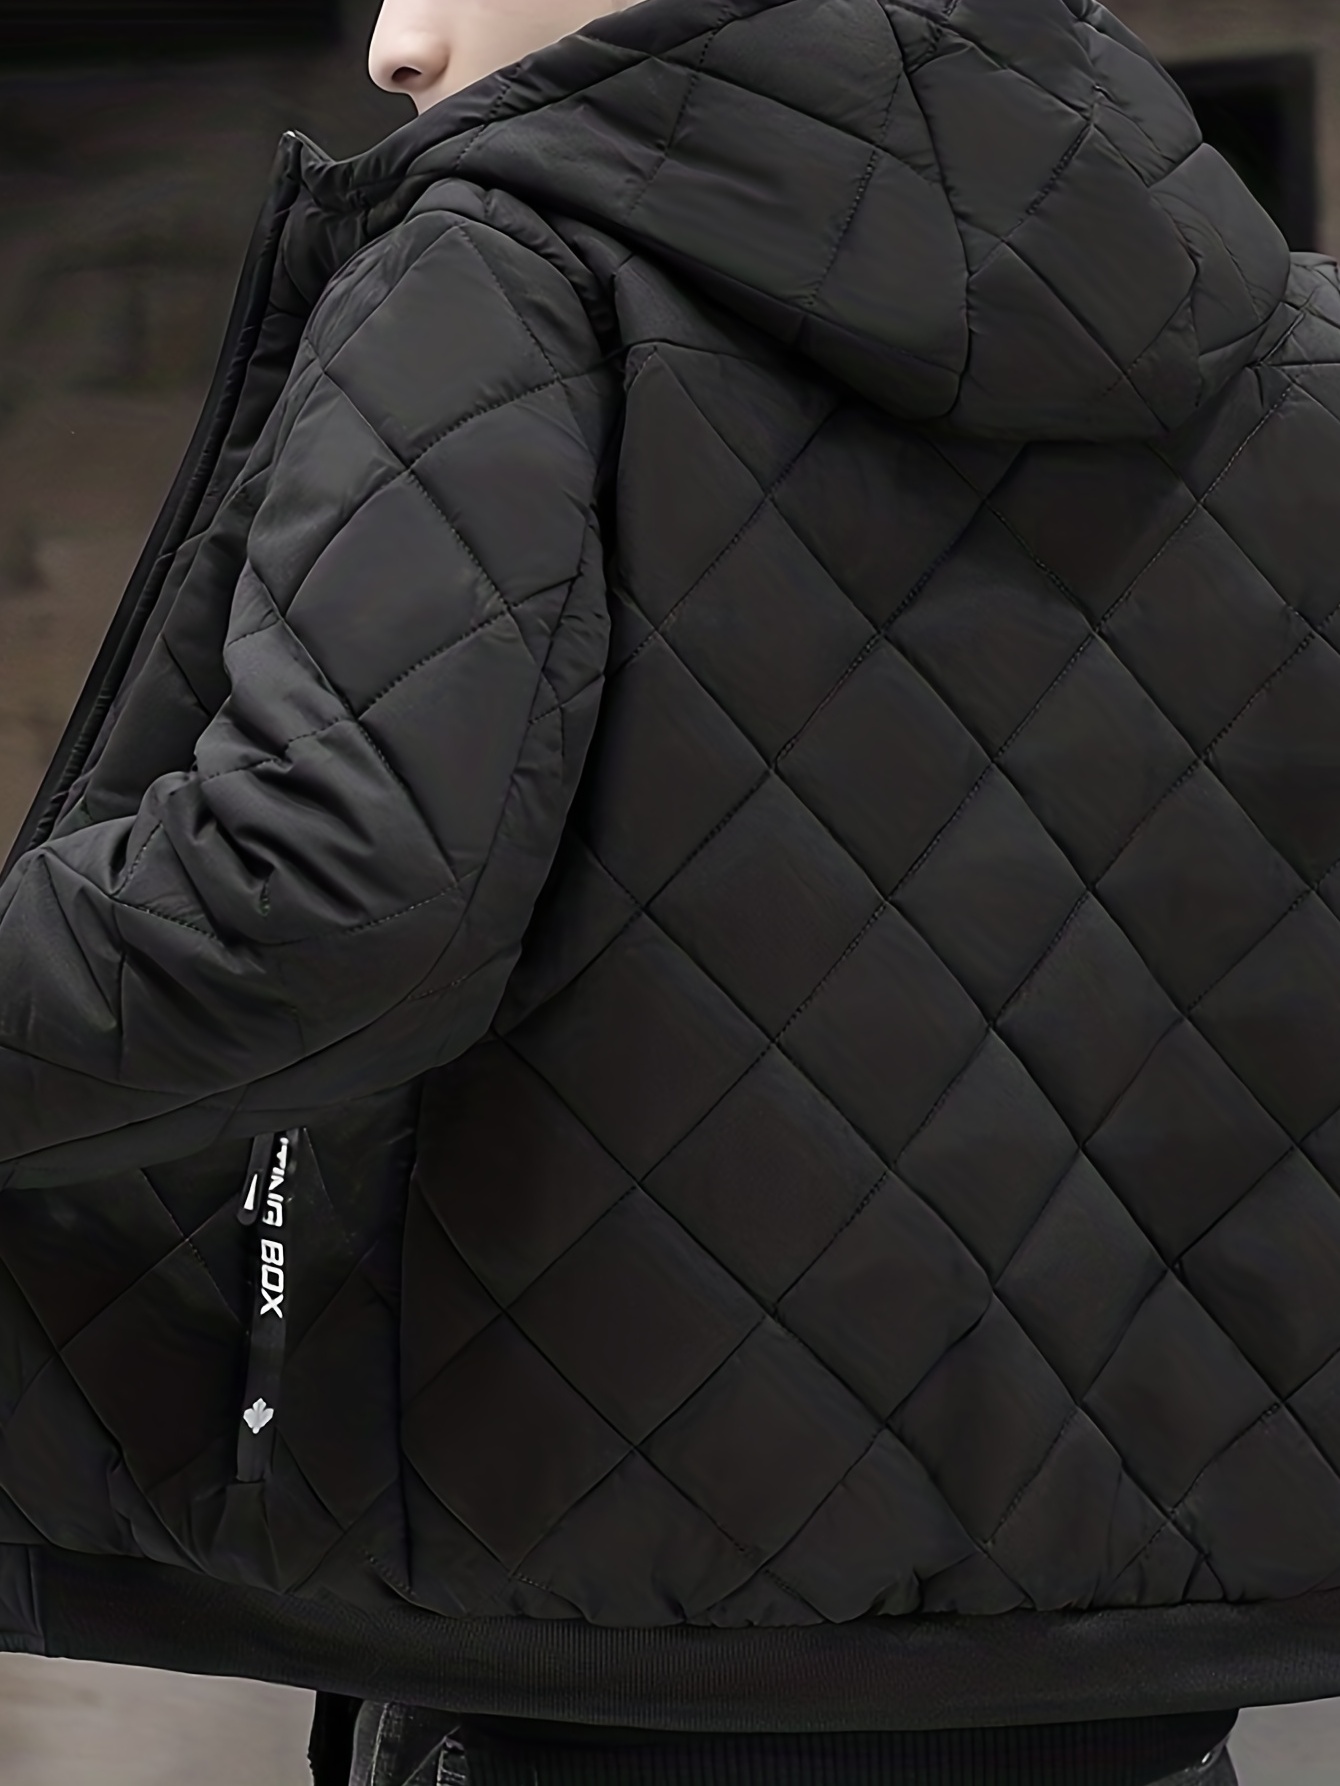 Warm Winter Plush Hooded Jacket, Men's Casual Zip Up Warm Quilted Jacket  For Fall Winter Outdoor